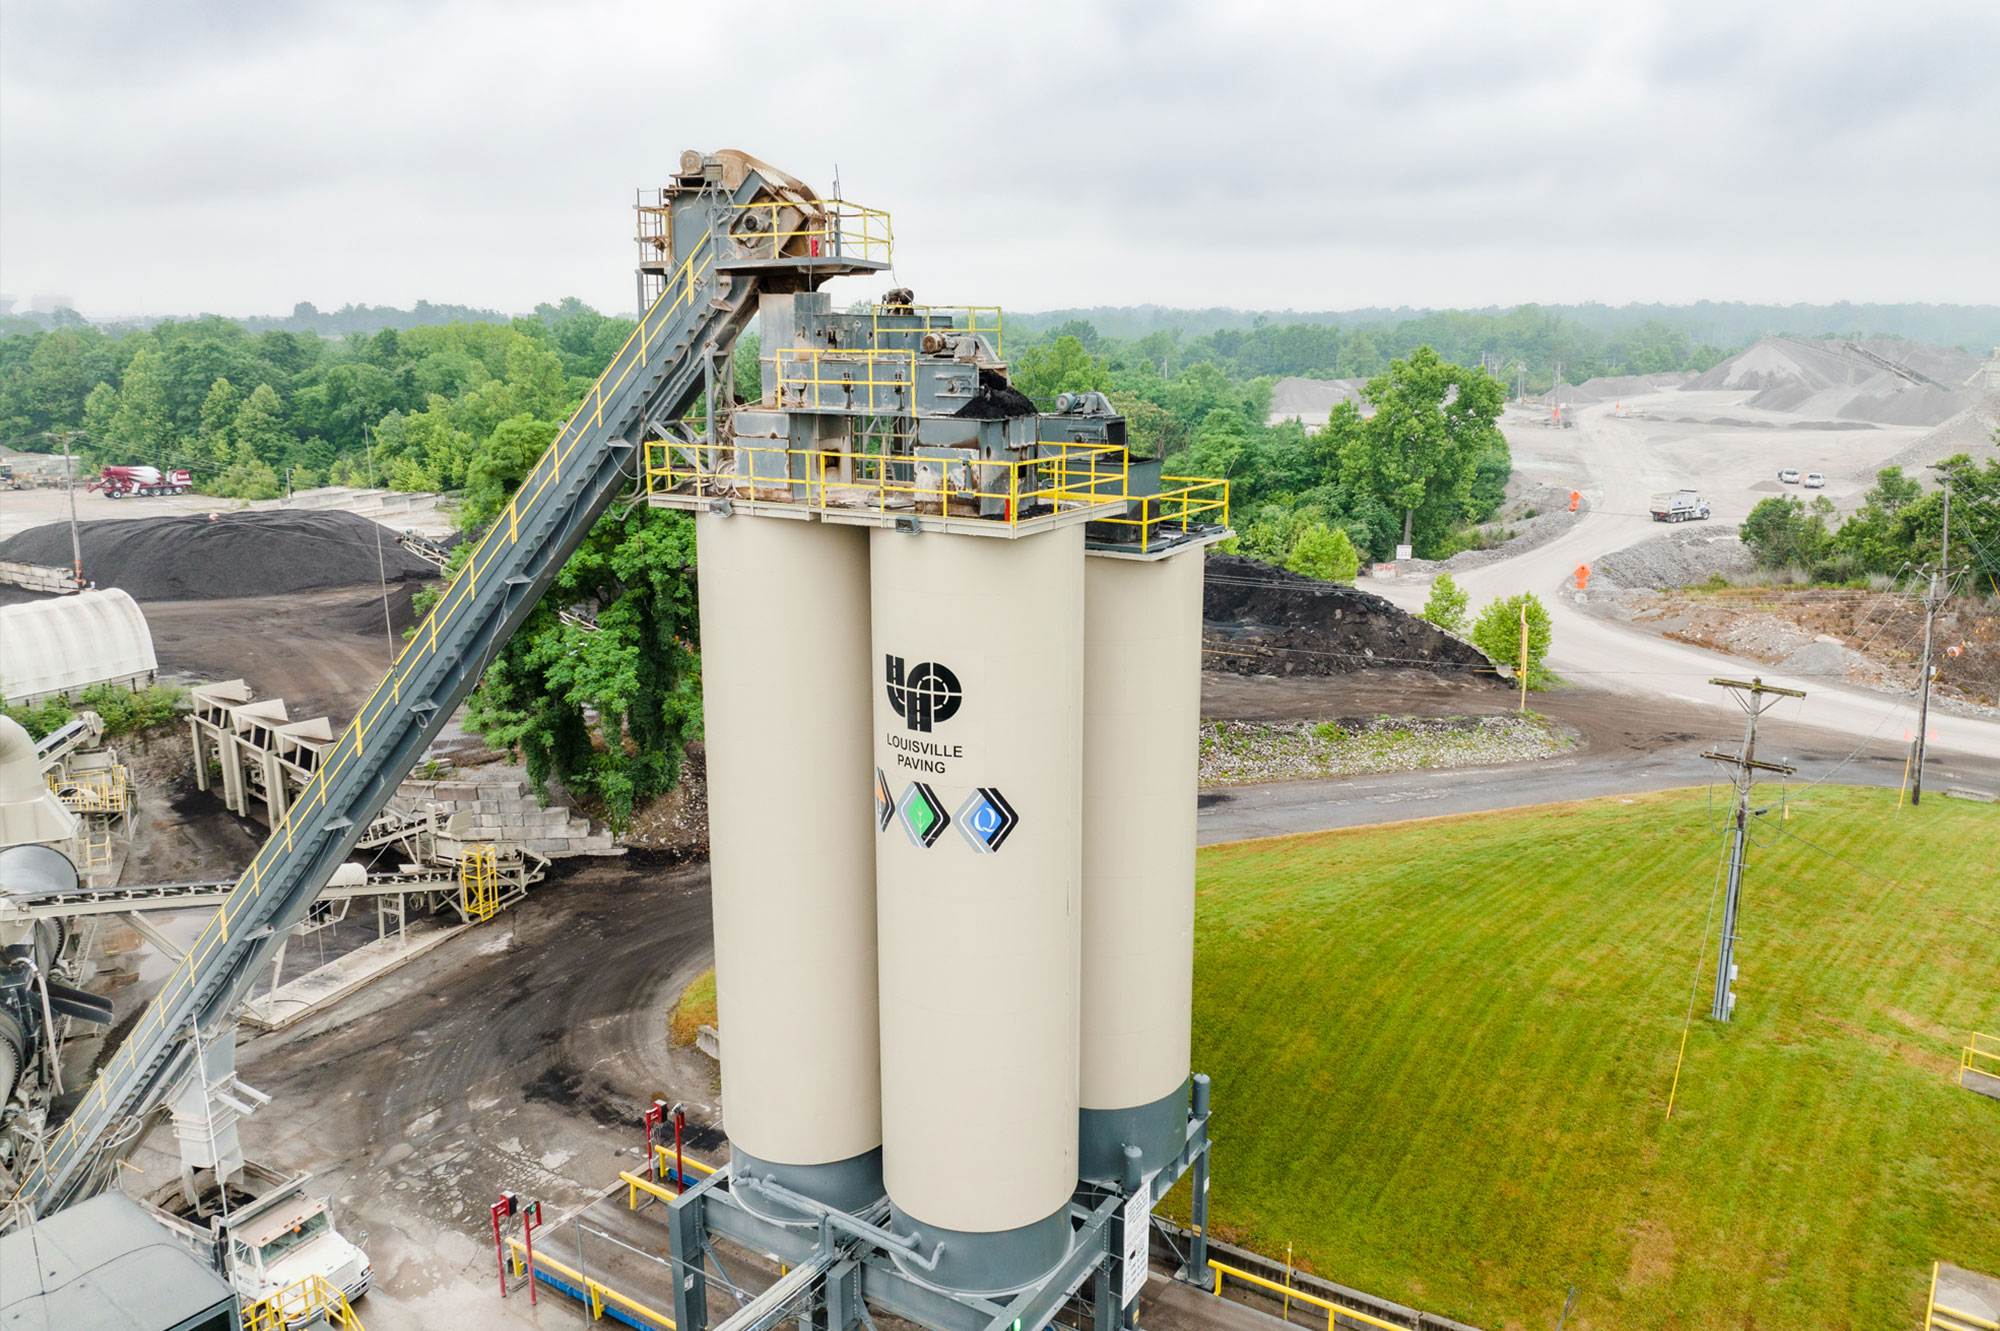 The Louisville Paving & Construction asphalt plant surrounded by trees in Kentuckiana